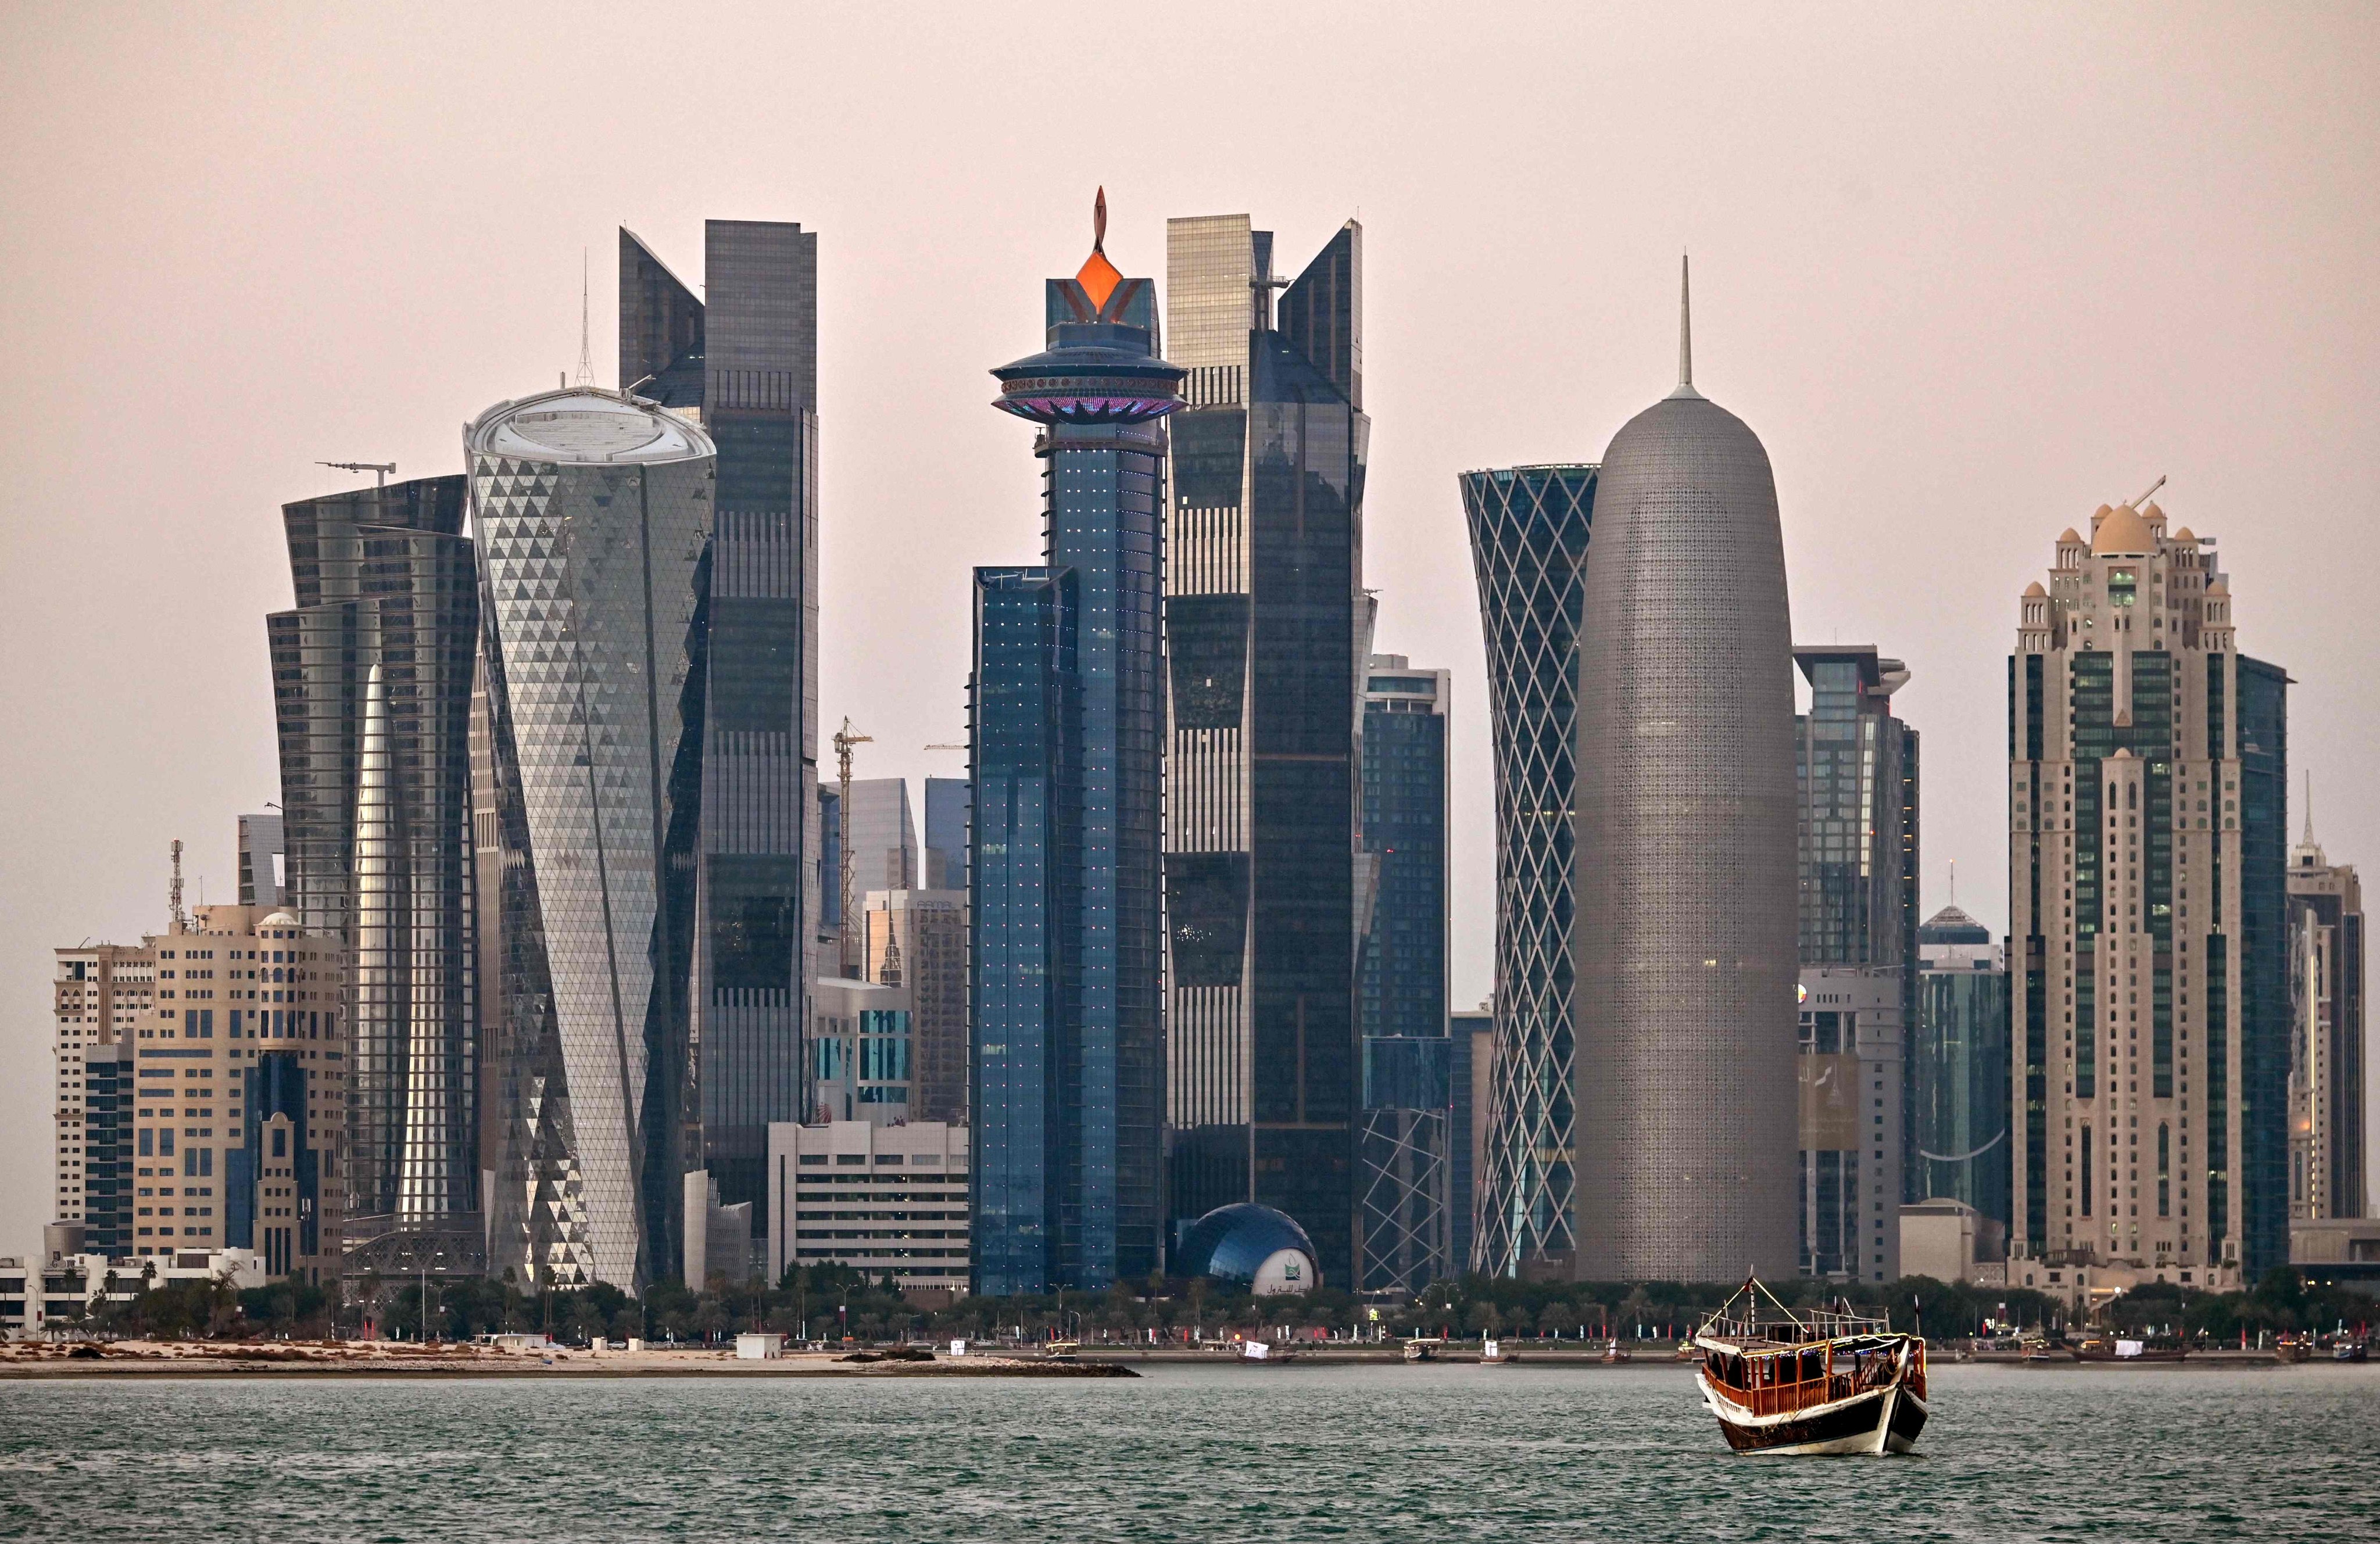 A view of high-rise buildings in the Qatari capital, Doha. Photo: AFP